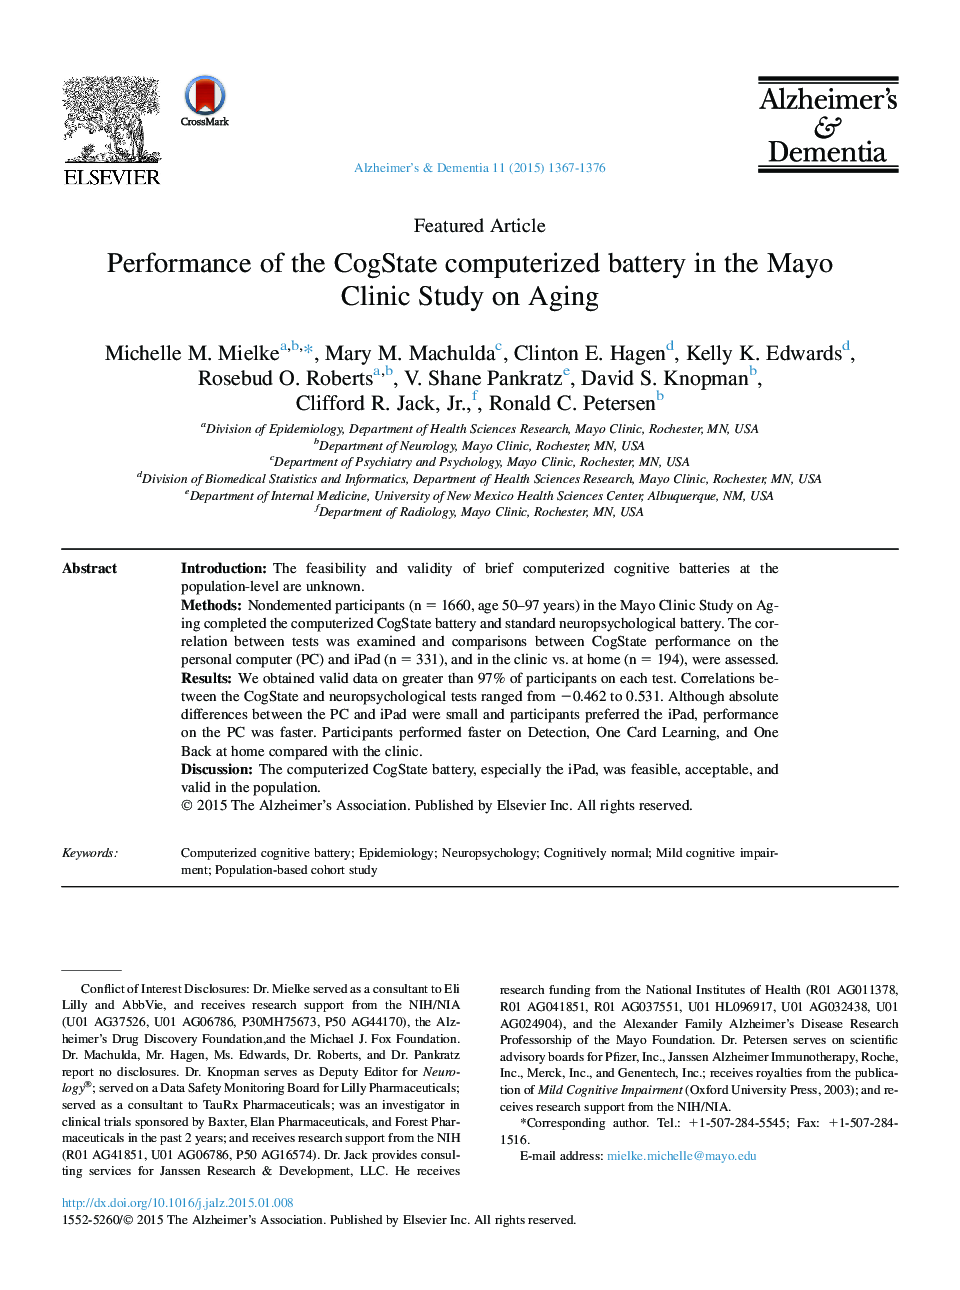 Featured ArticlePerformance of the CogState computerized battery in the Mayo ClinicÂ Study on Aging